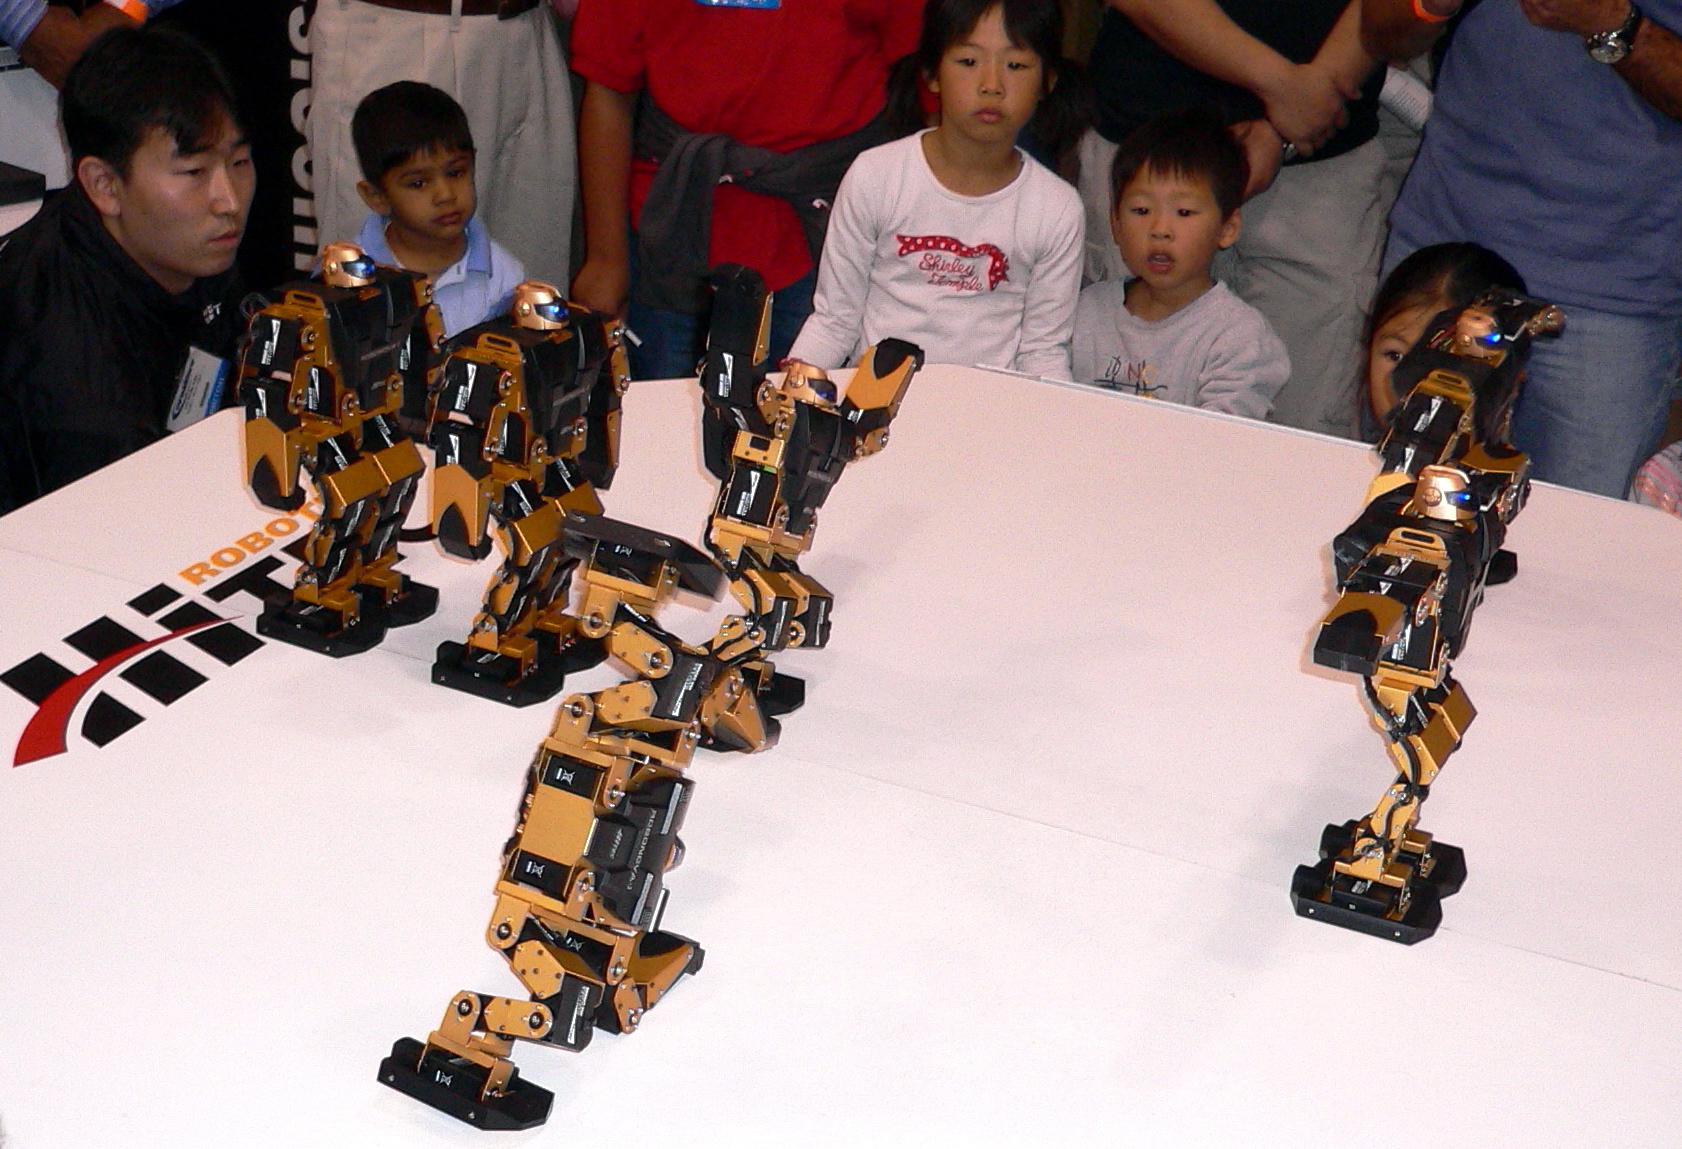 children and adults looking at a small robot sculpture